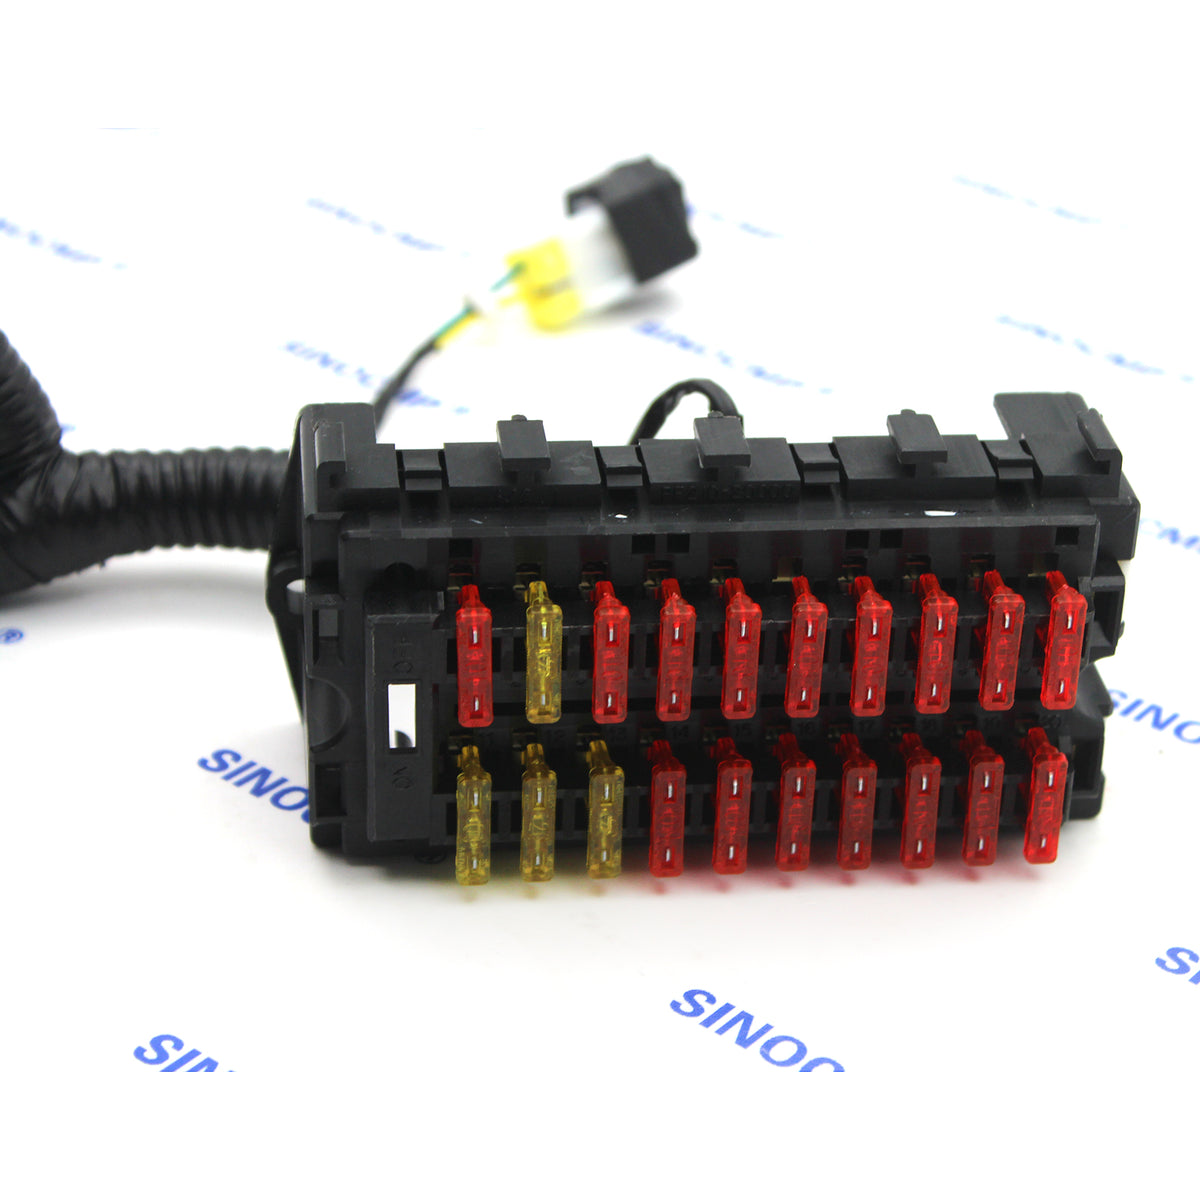 20Y-06-71511 Cable Wiring Harness for Komatsu Excavator PC200-7 PC220-7